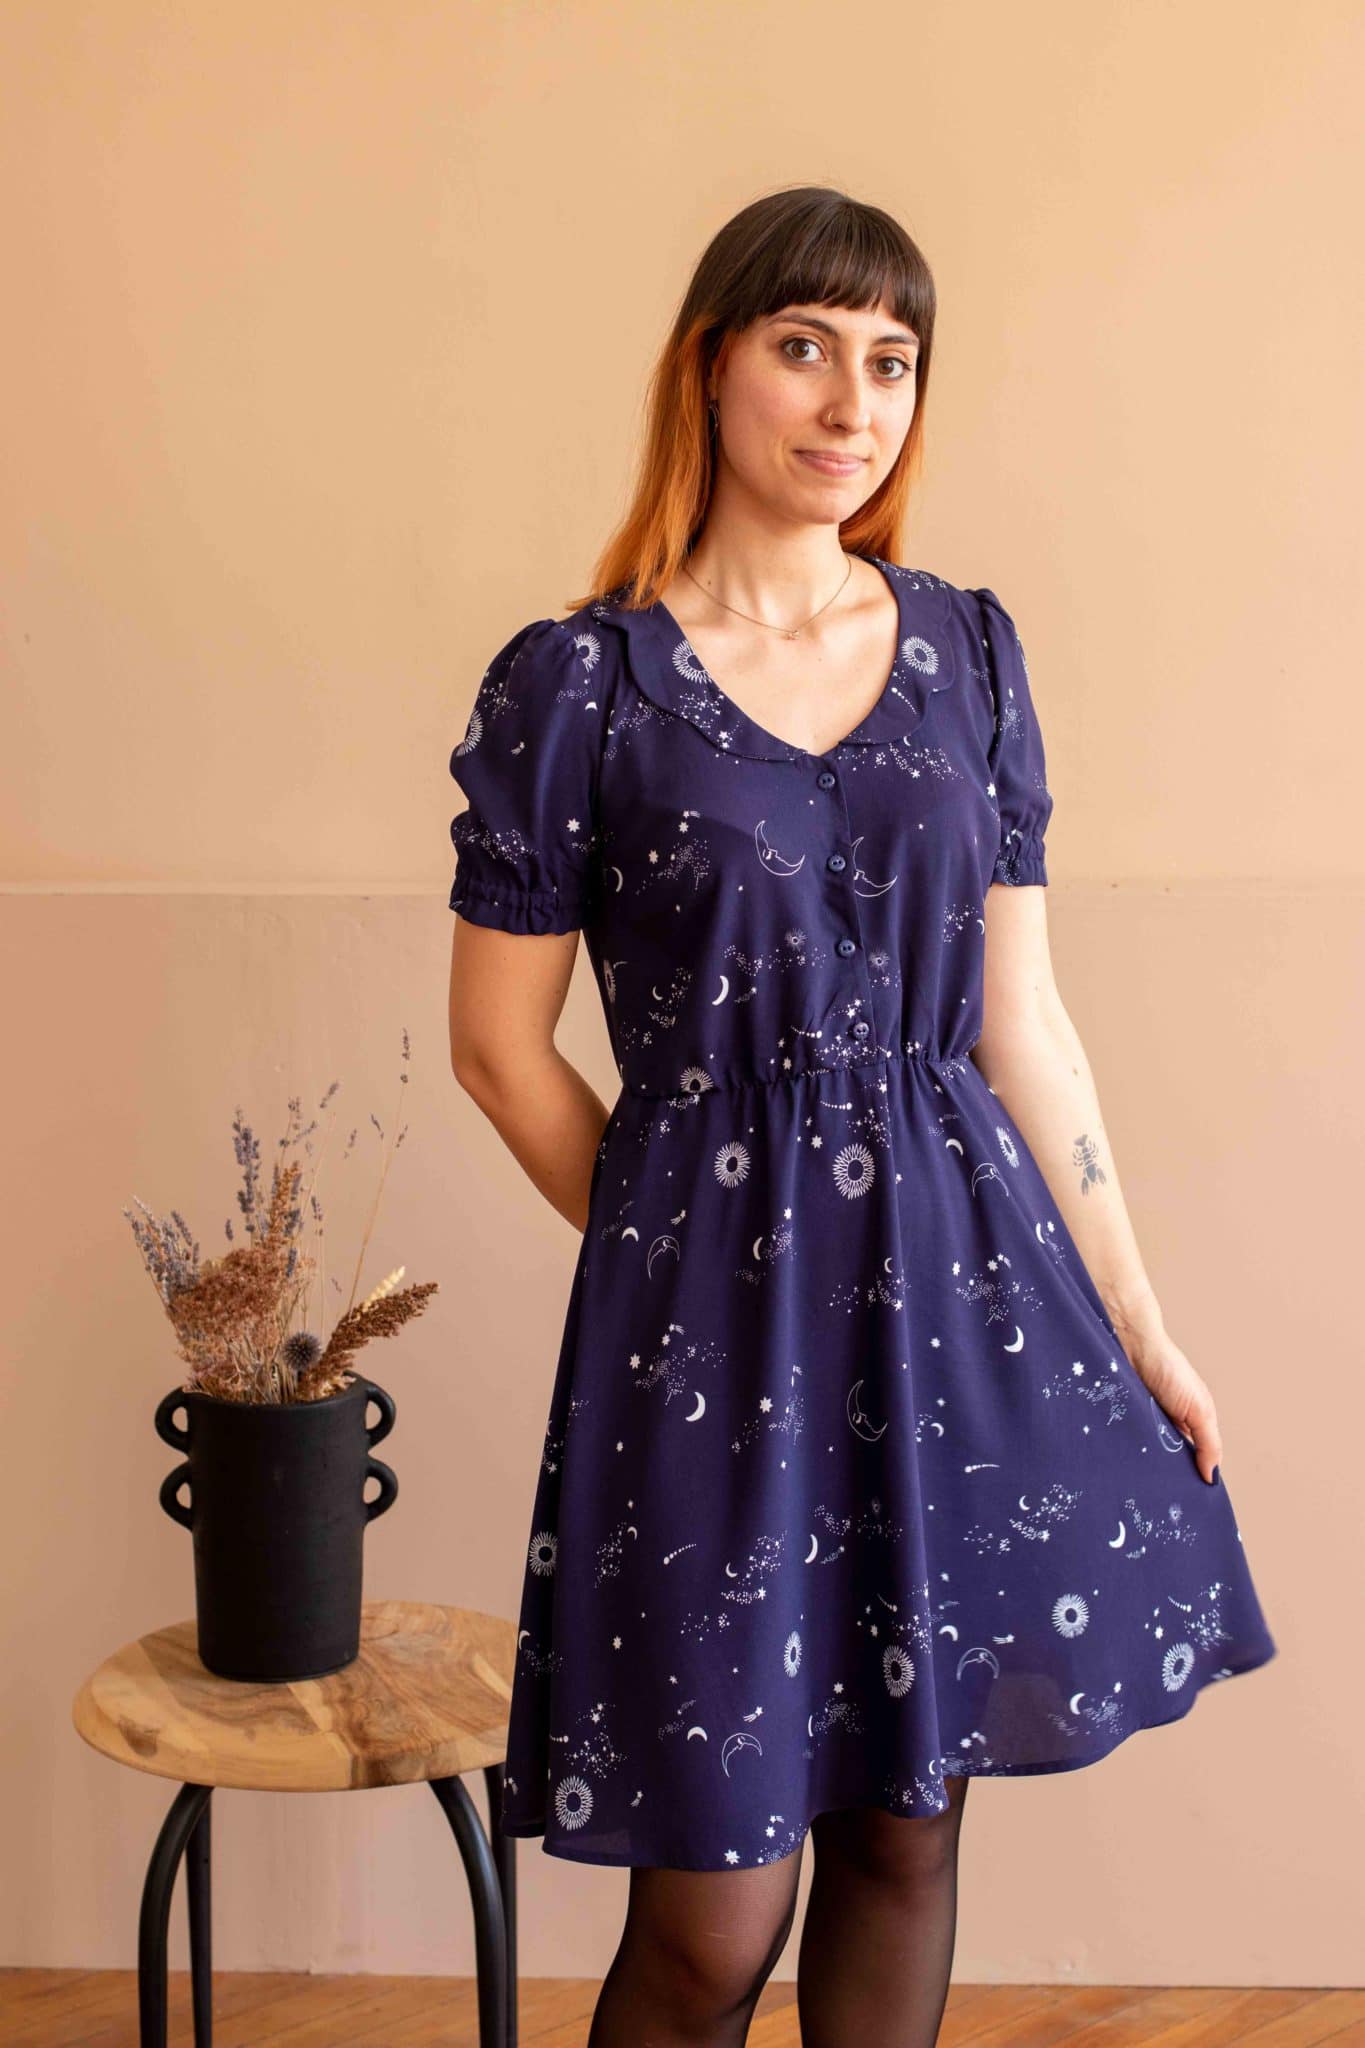 Sewing Kit - Lise Tailor Comete Dress & Blouse in Watercolour Blossom